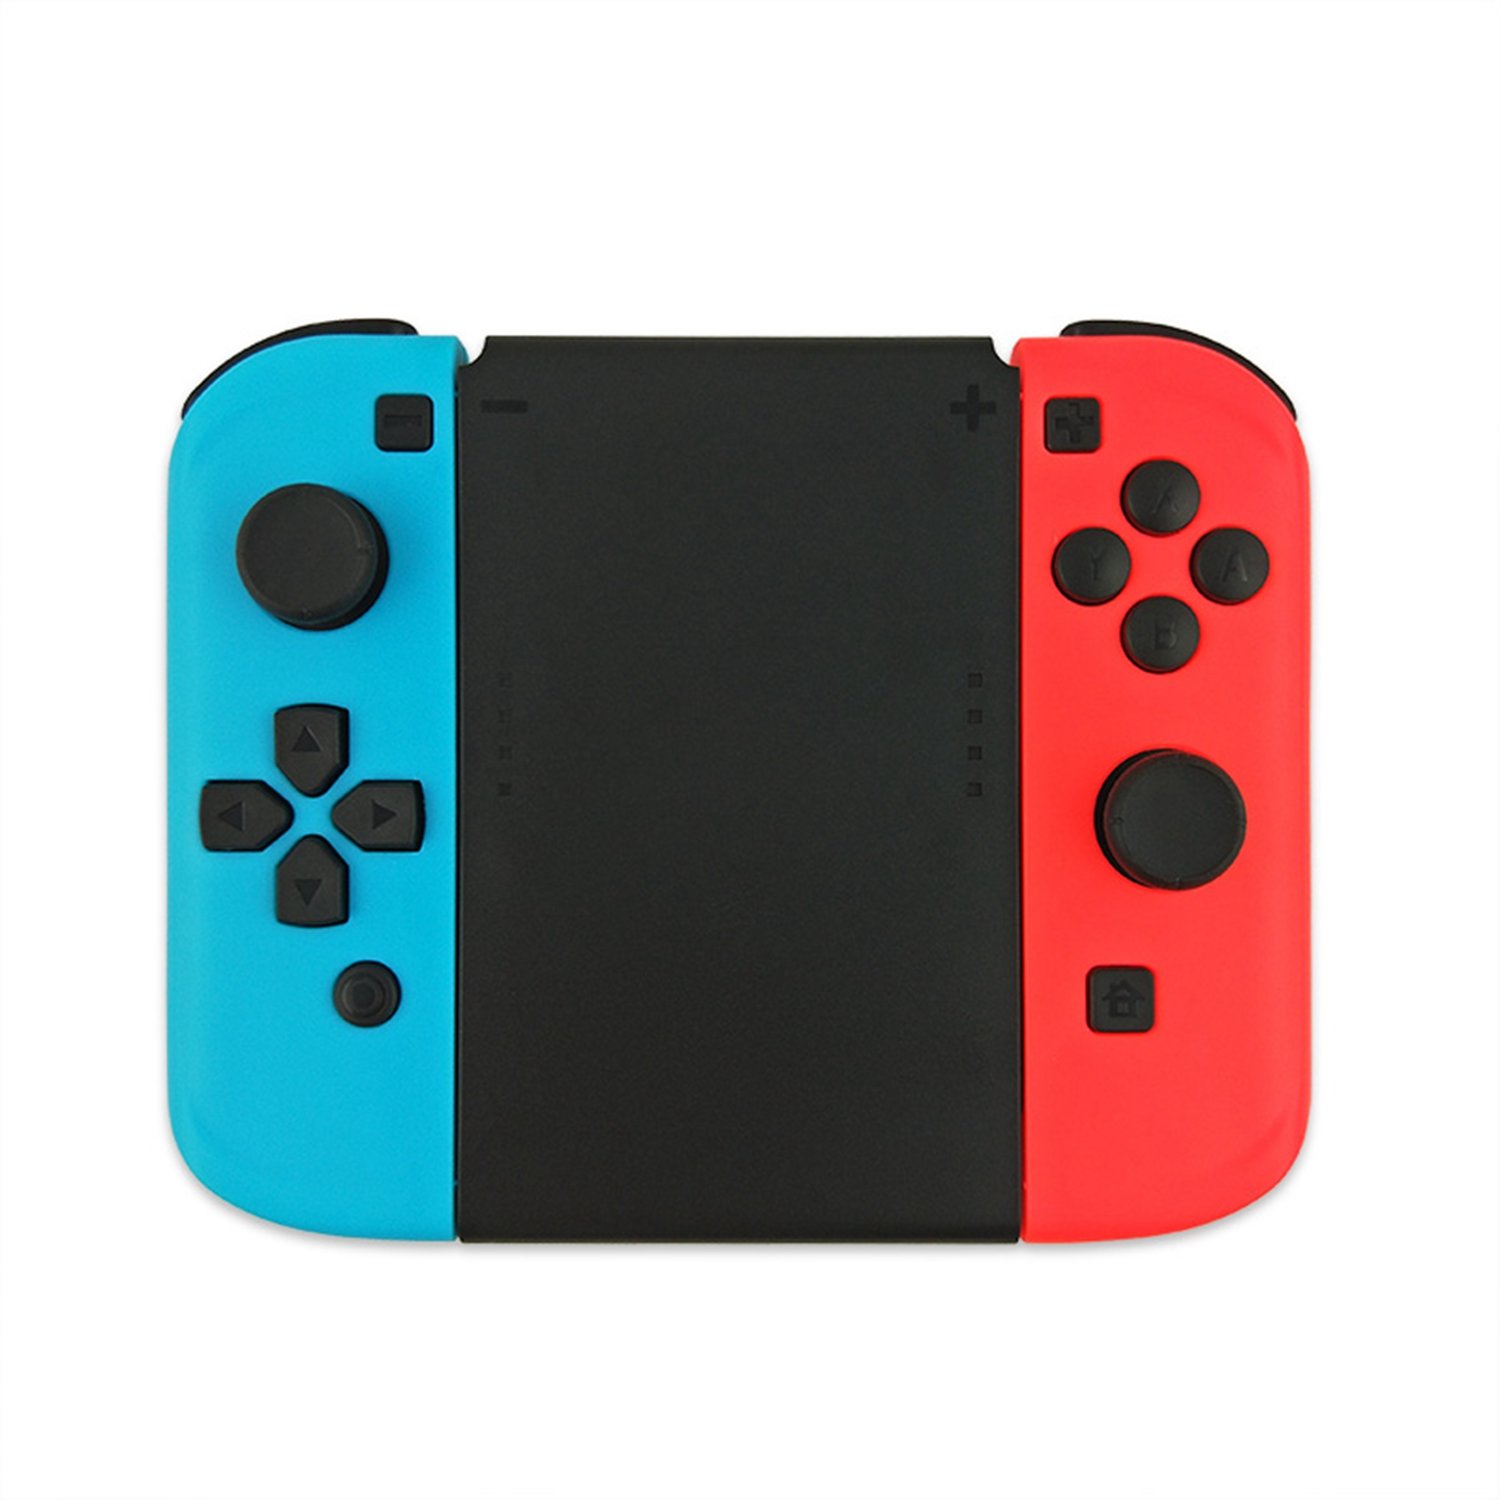 5 In 1 Connector Pack for Nintendo Switch Joy-Con Gamepad Game Controller Hand Grip Case Handle Holder Cover 1